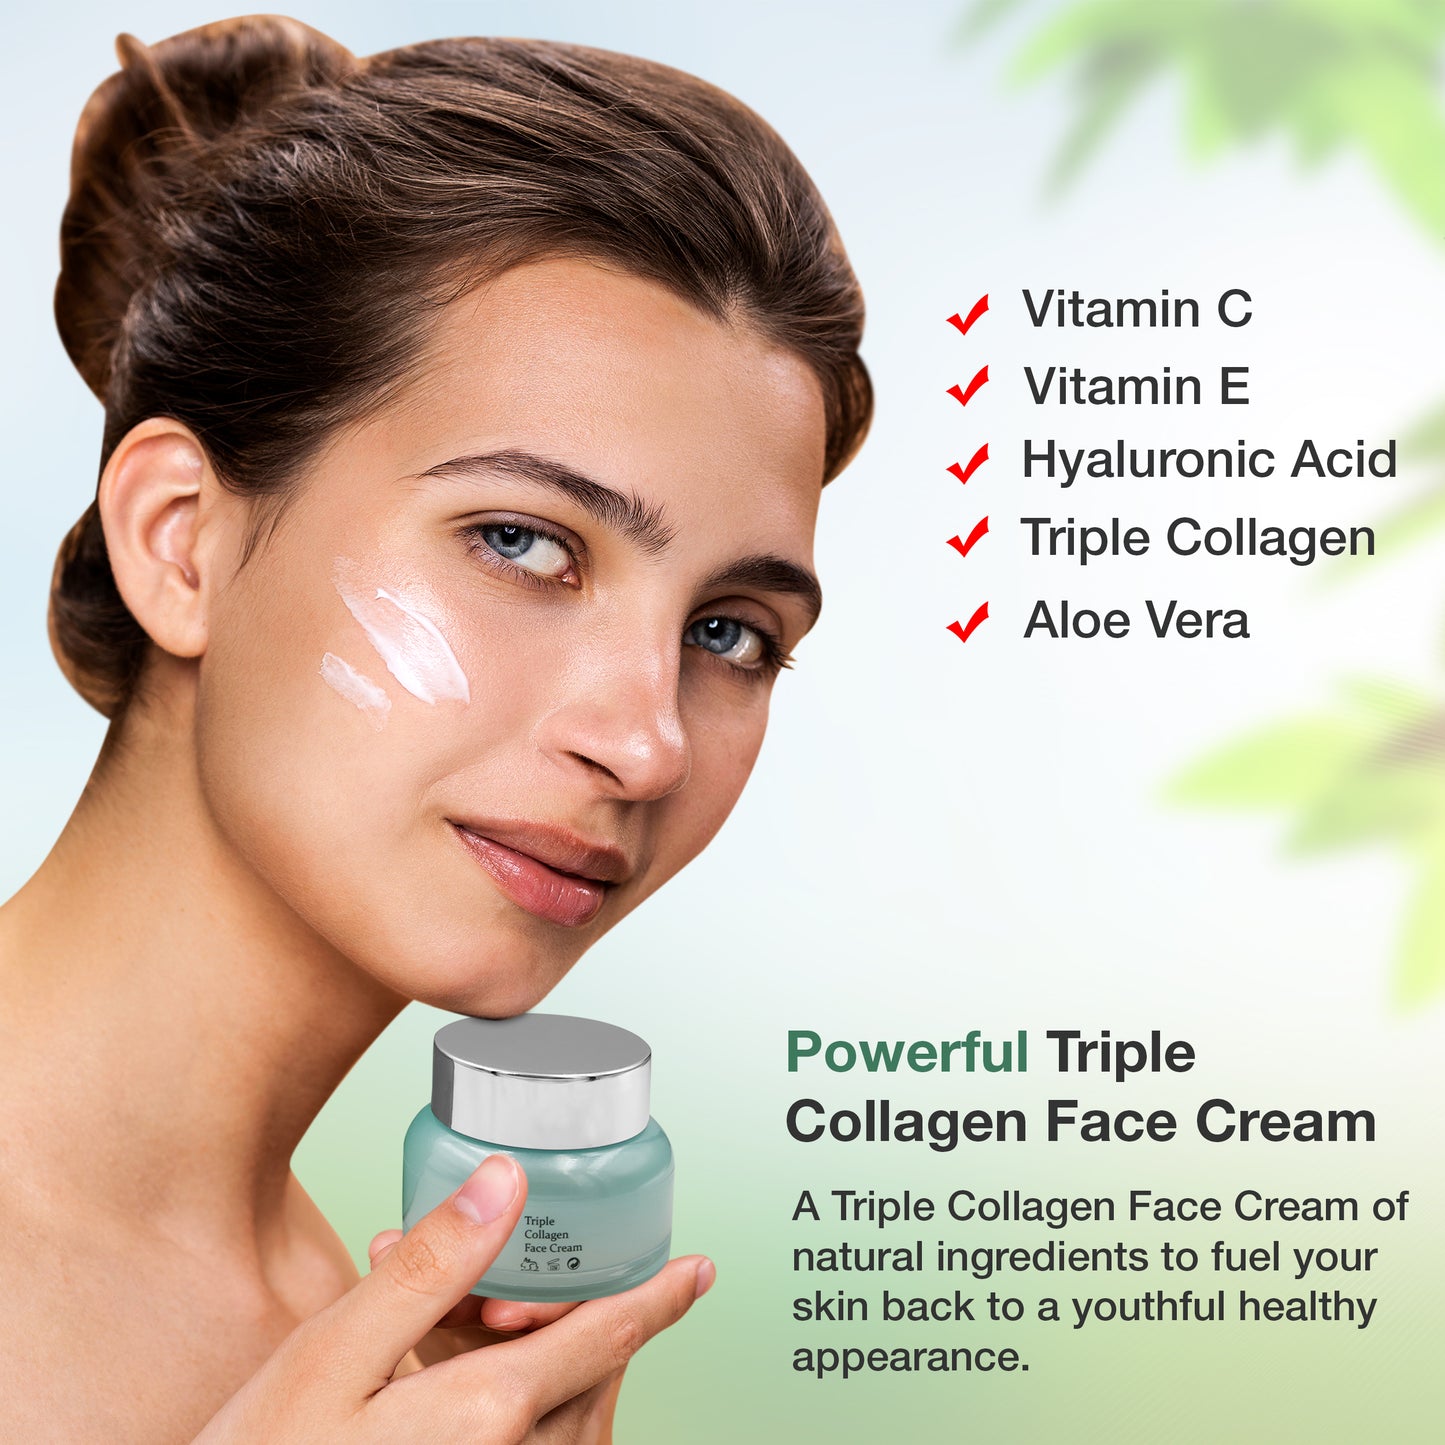 Organic Triple Collagen Anti Aging Skincare Face Cream | Moisturizing and Skin Firming with Natural Ingredients to Reduce Fine Lines, Dark Spots and Deep Hydration.